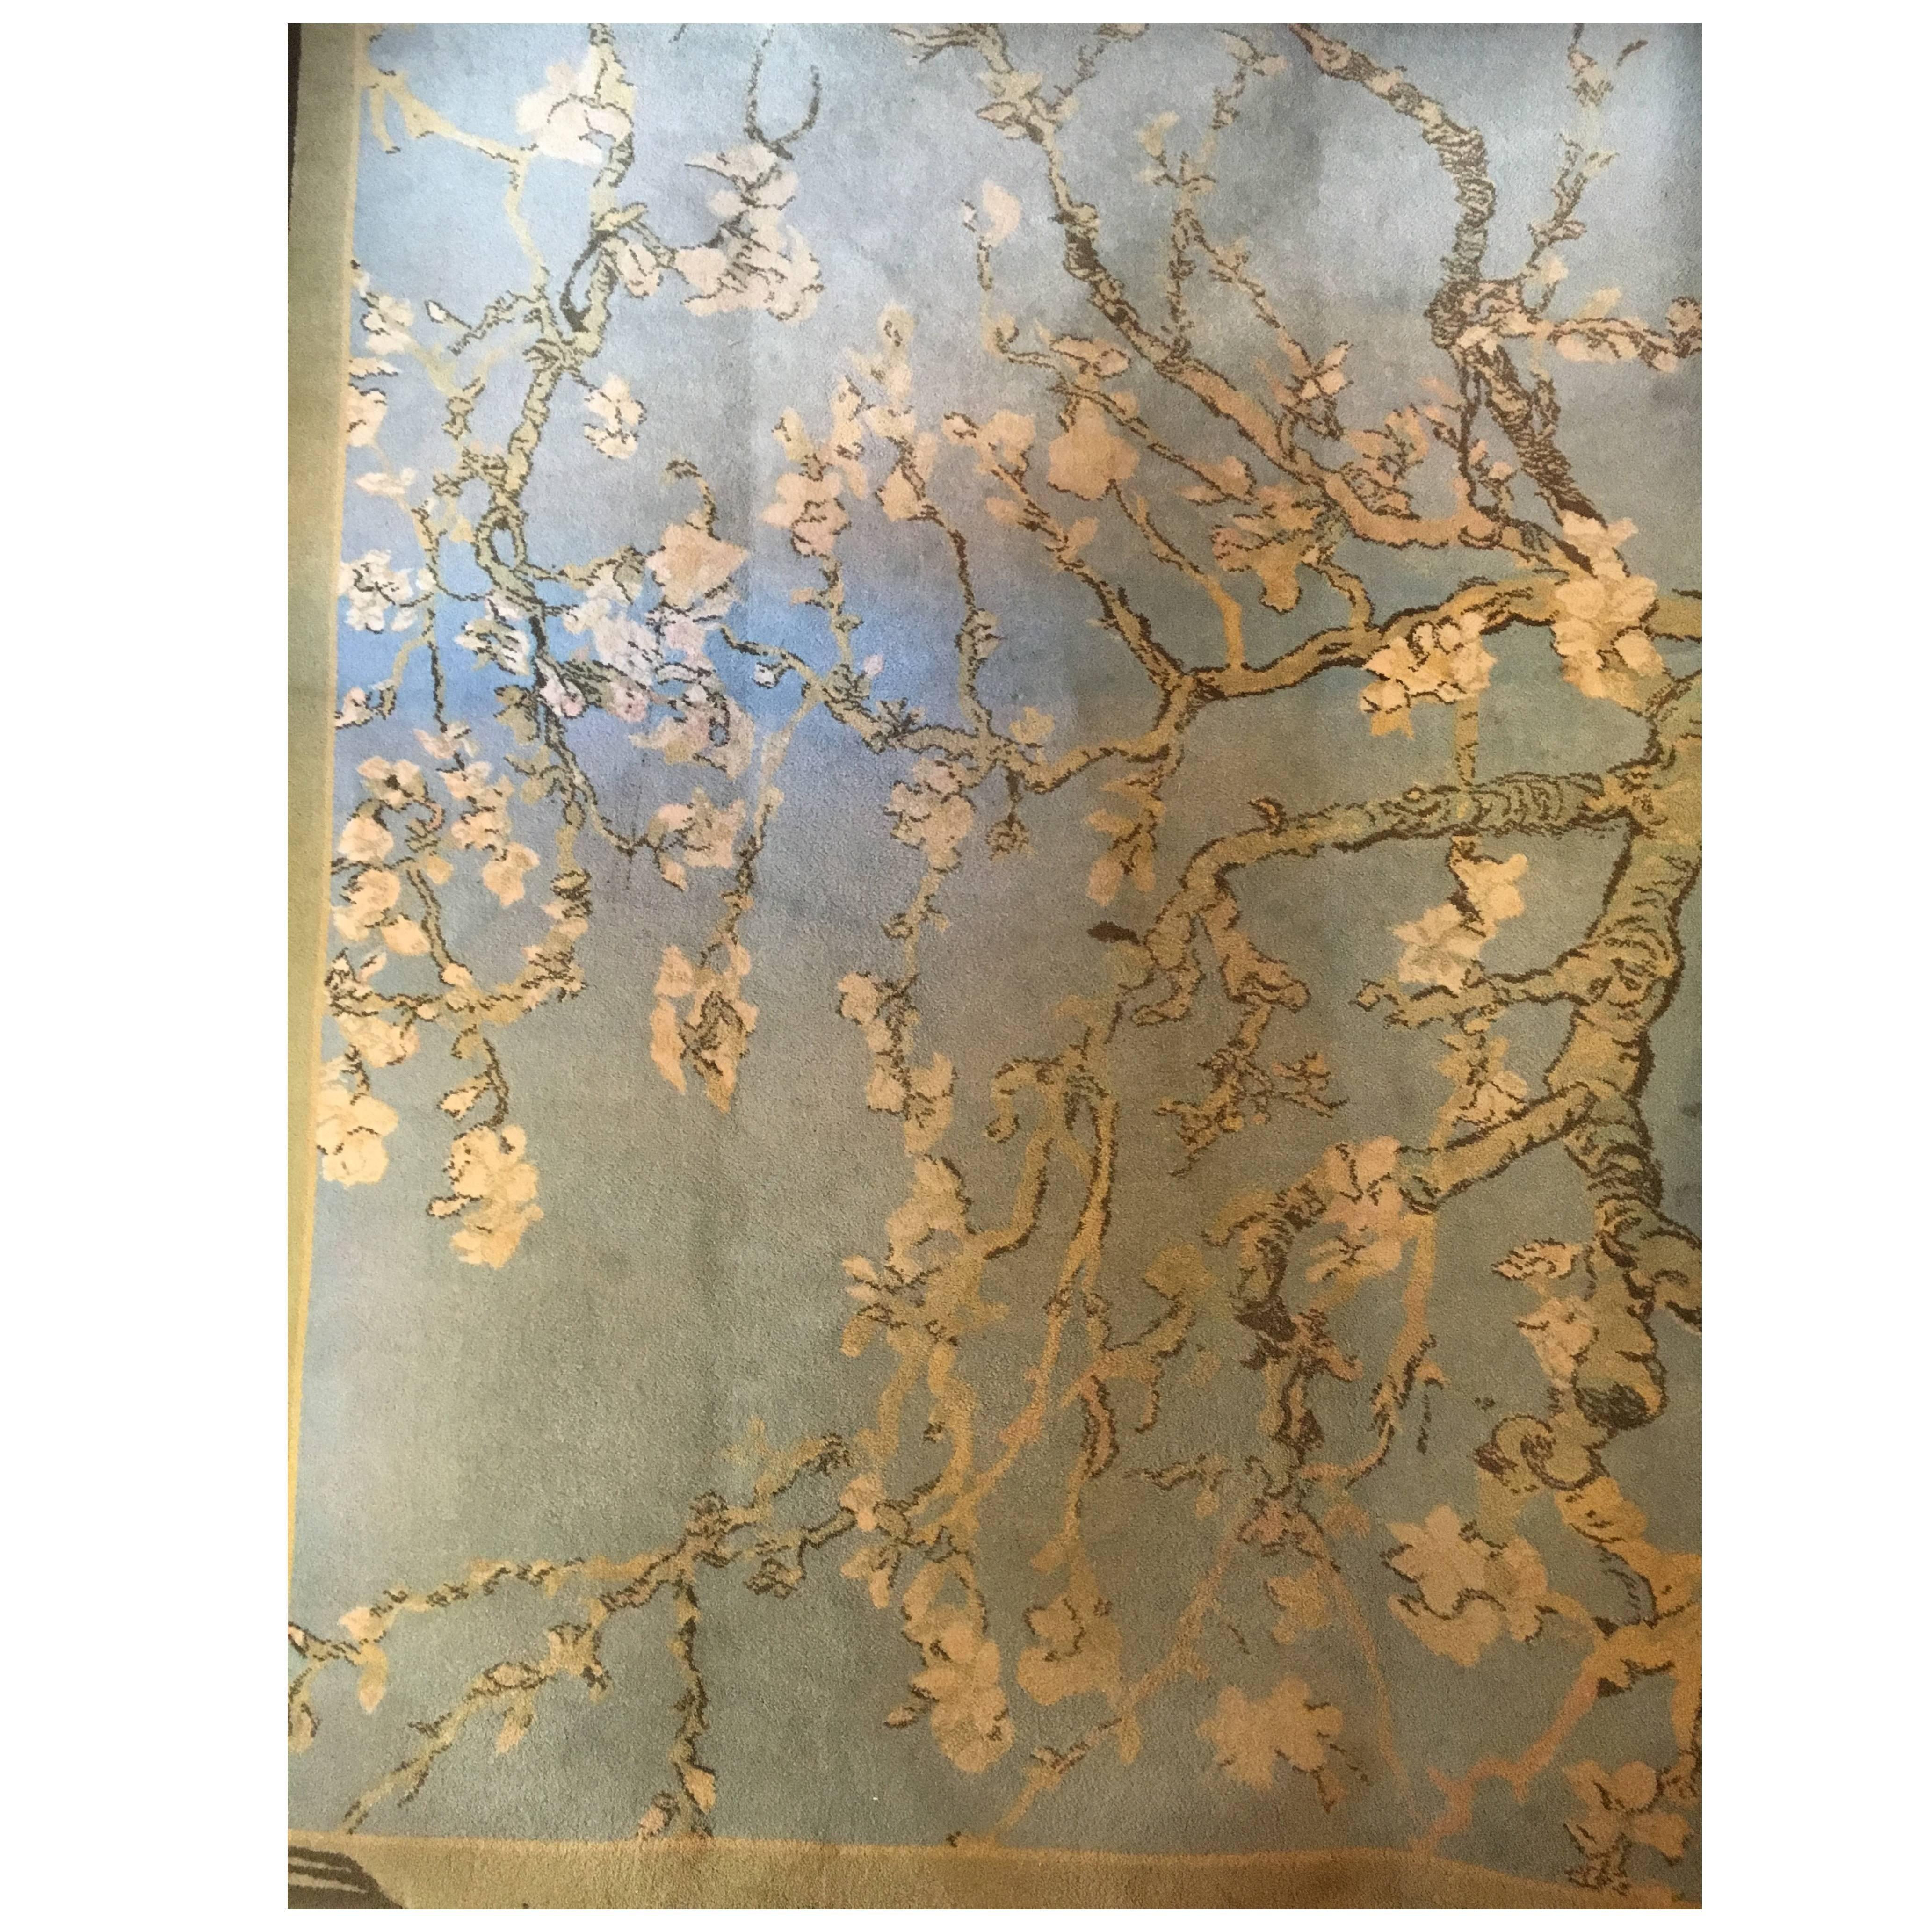 Vincent van Gogh Blossoming Almond Tree Carpet by Ege Axminster